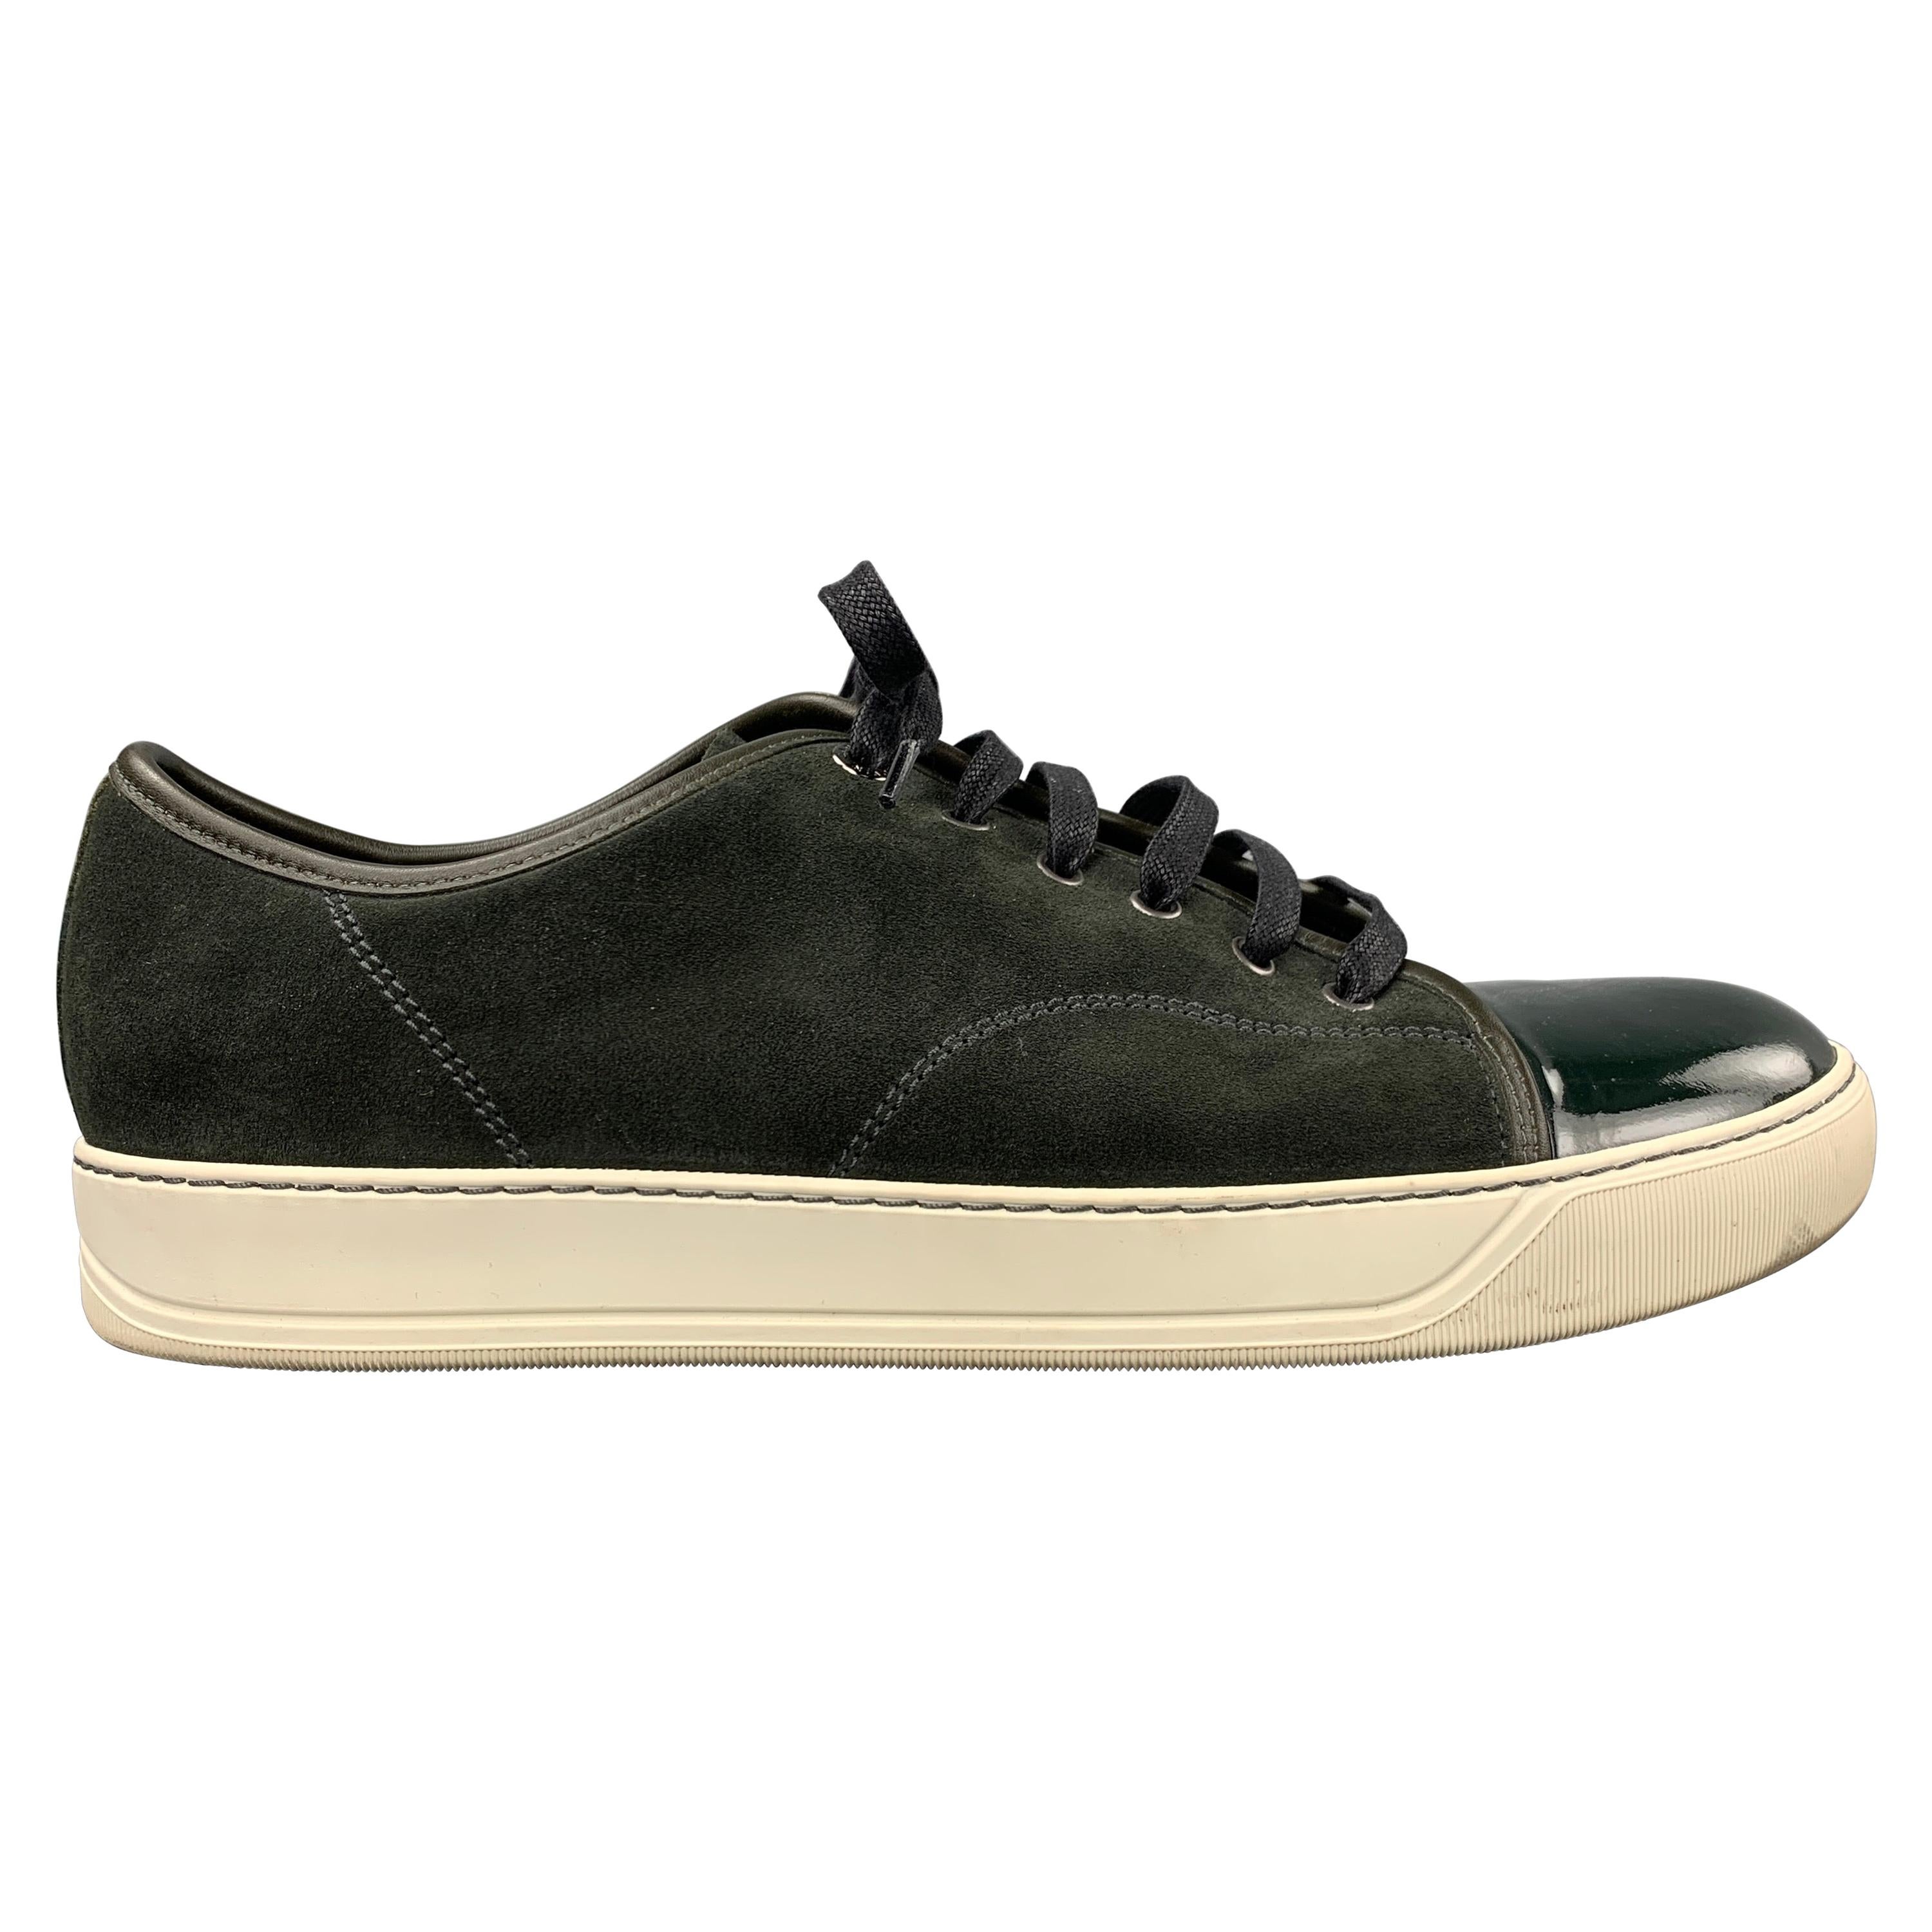 LANVIN Size 10 Olive Suede Patent Leather Cap Toe Sneakers